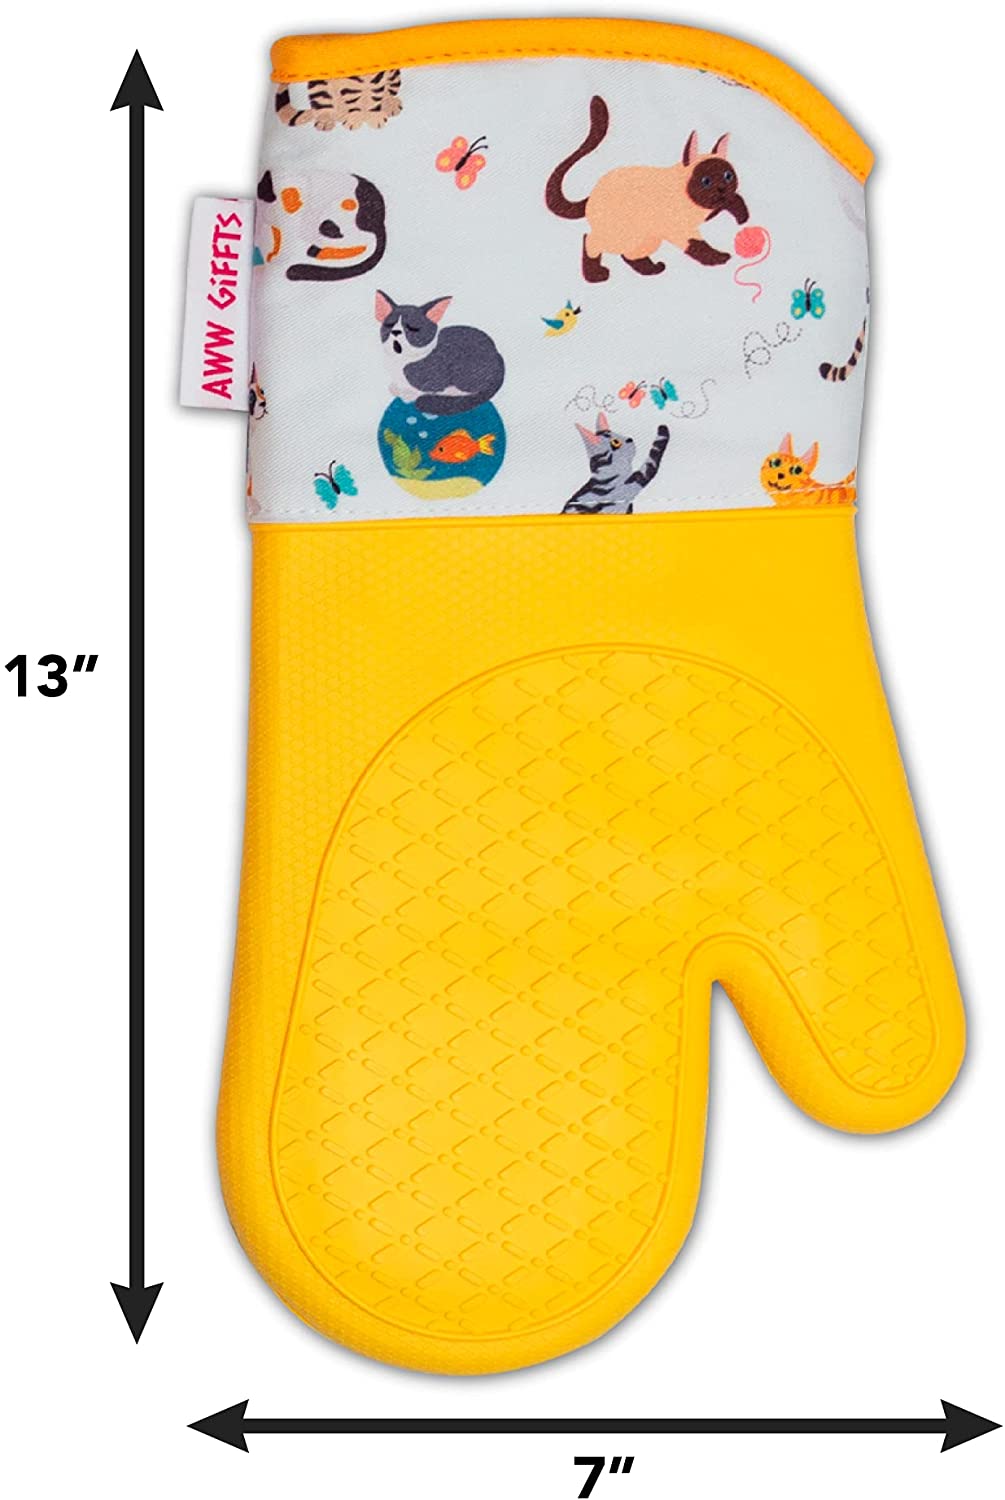 AWW GIFFTS Frisky Cats Eco-Friendly Ultra-Flex Kitchen 2-PC Oven Gloves/Mitt and Pot Holder Set | Cotton Twill/Silicone Cat Lover Pattern with Hanging Loop